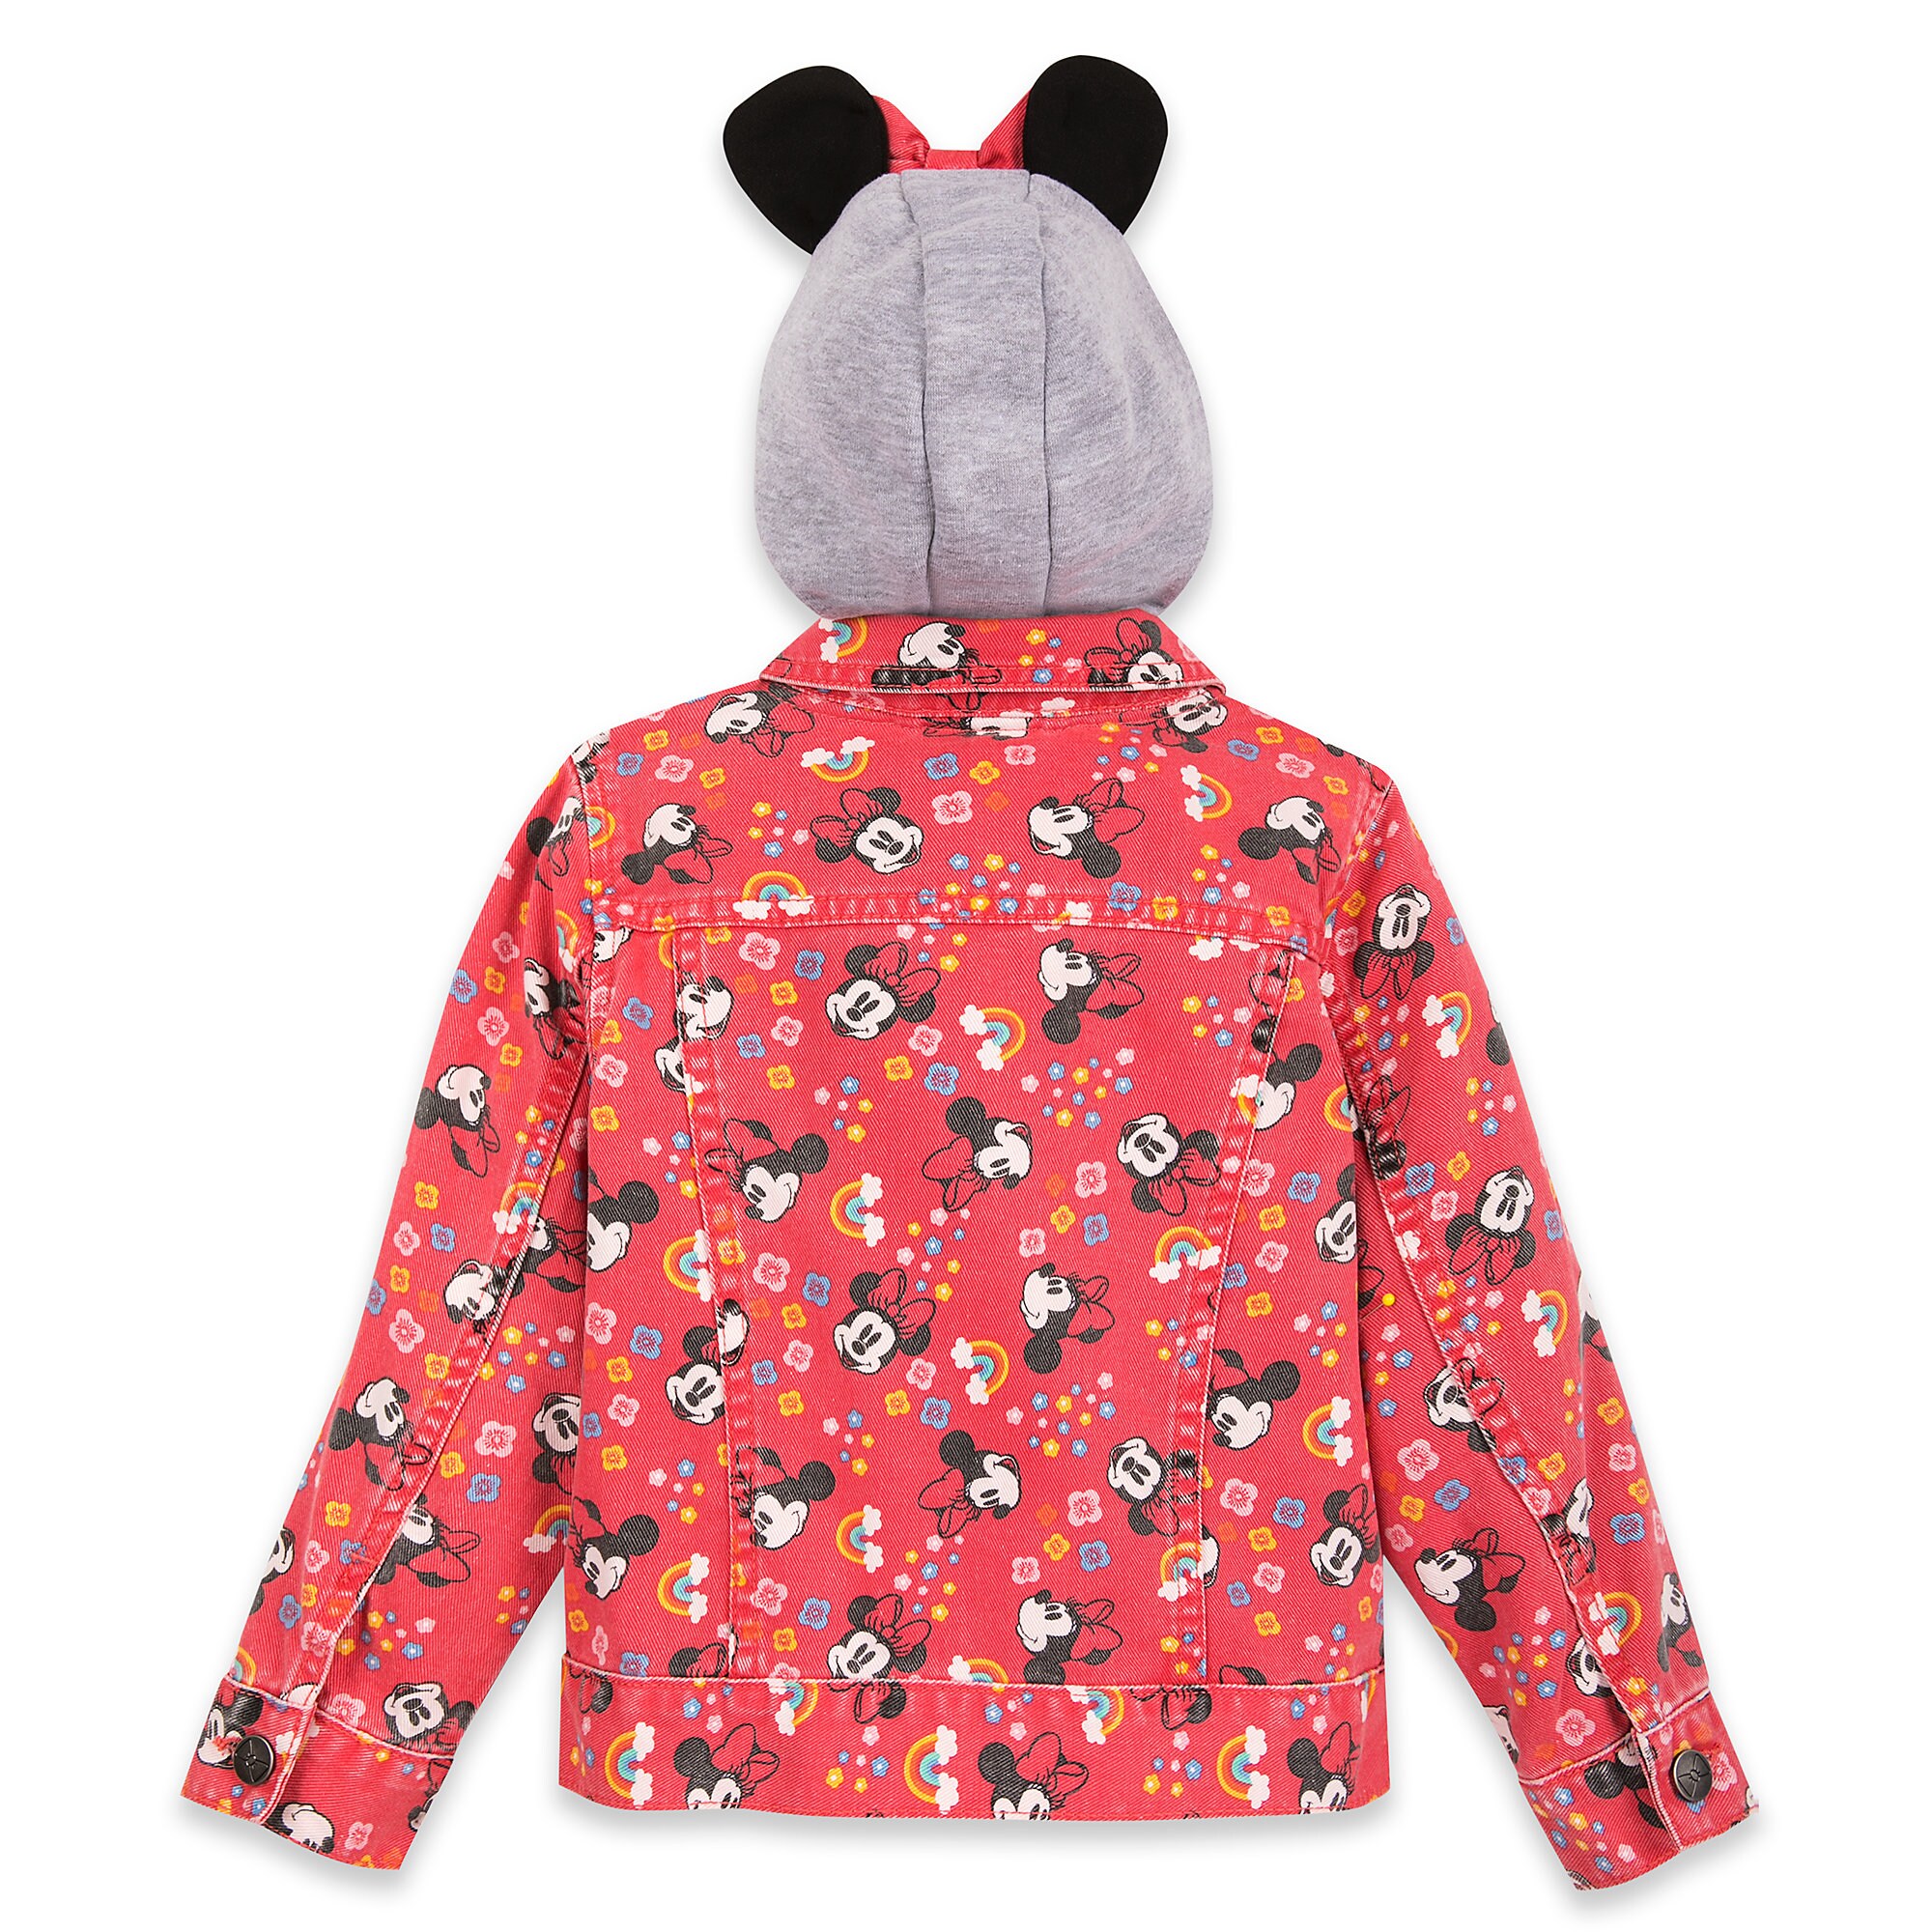 Minnie Mouse Hooded Denim Jacket for Girls is now available – Dis ...